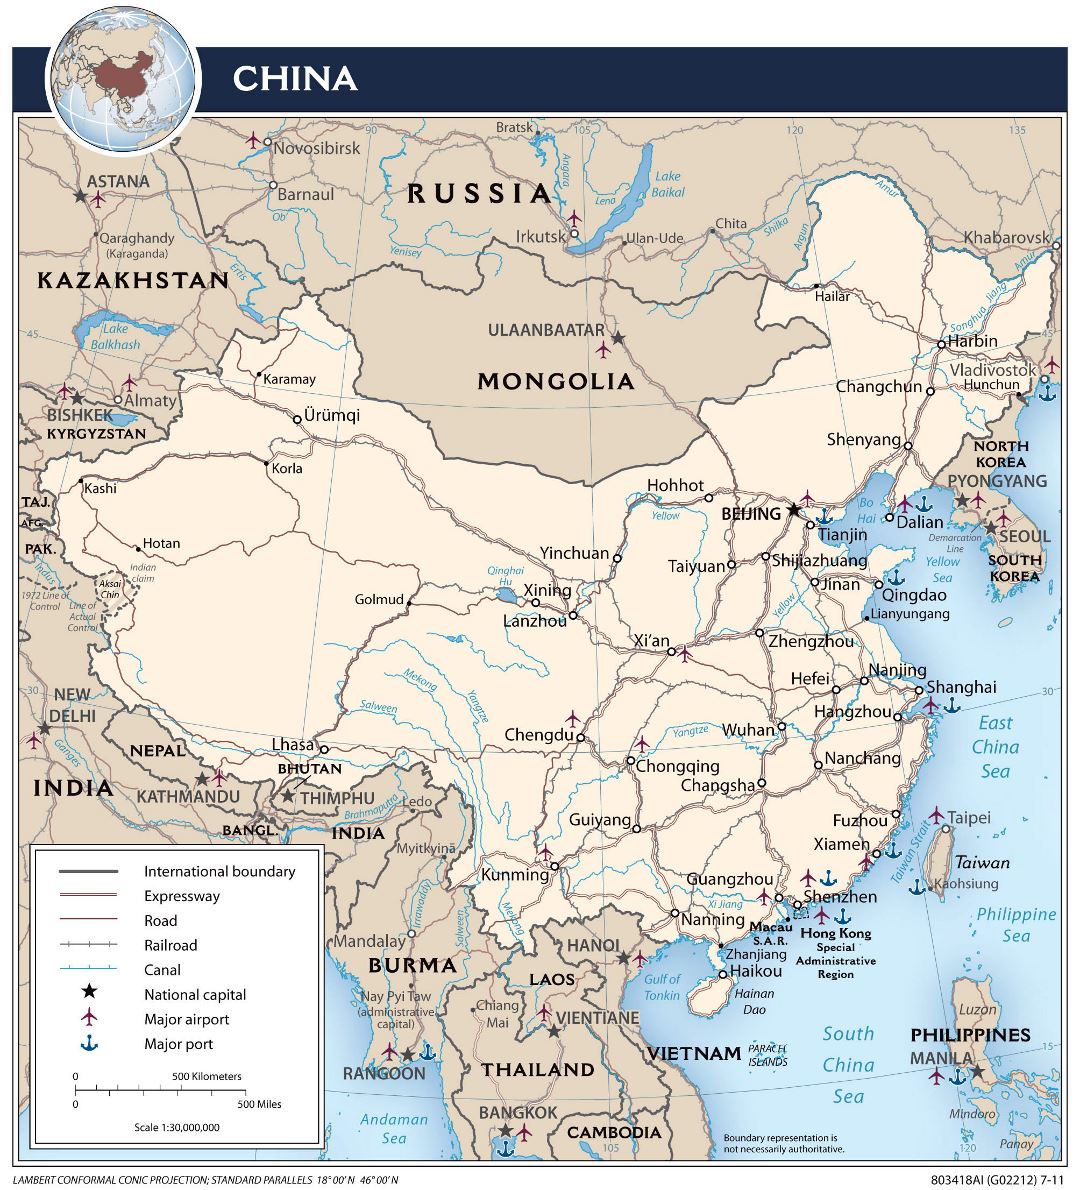 Large detailed political map of China with roads, railroads, major cities, ports, airports and other marks - 2011